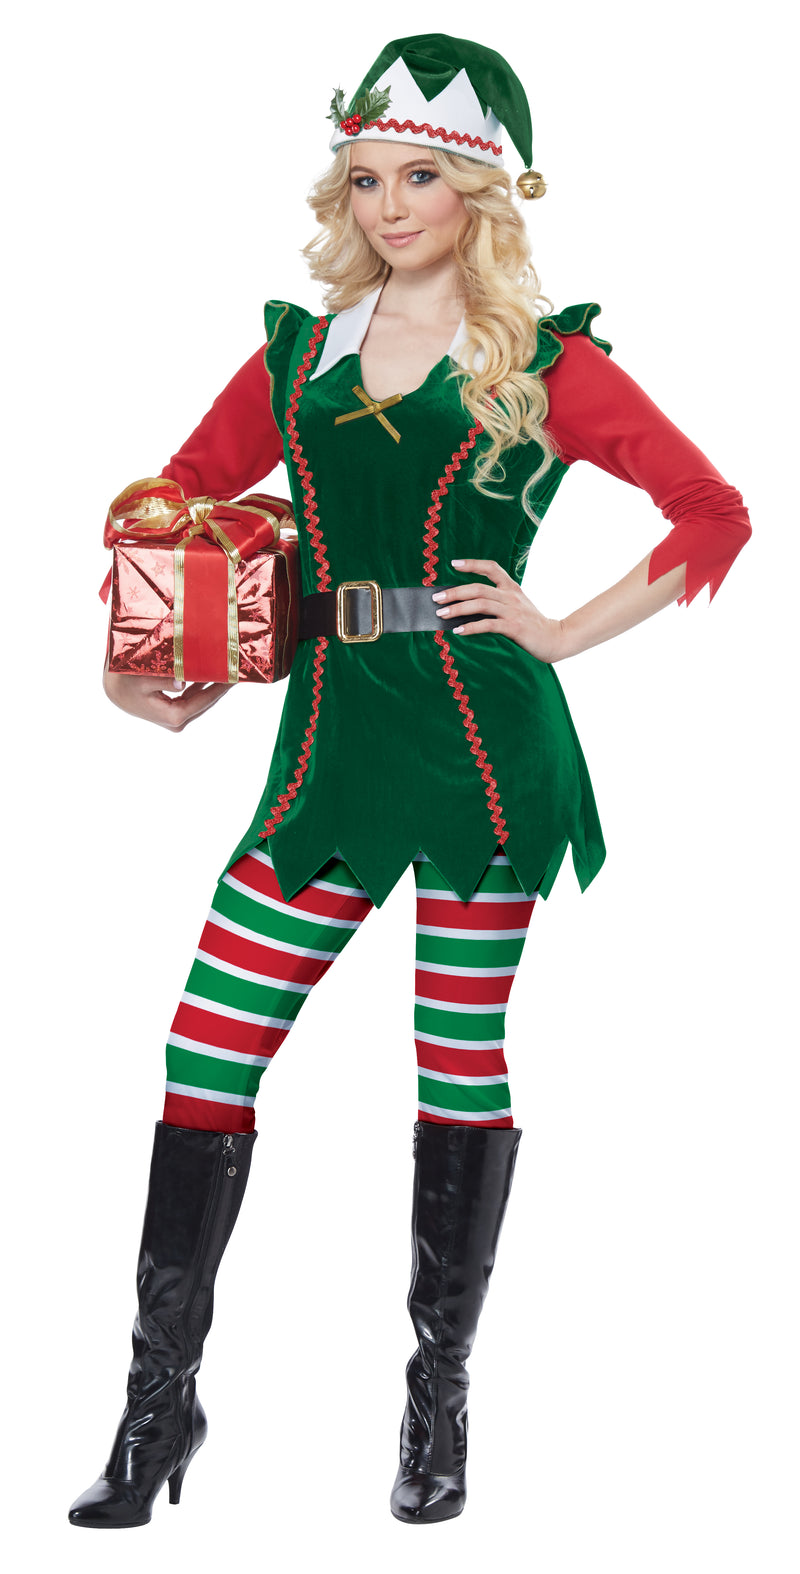 Festive Elf Costume Ladies Christmas outfit